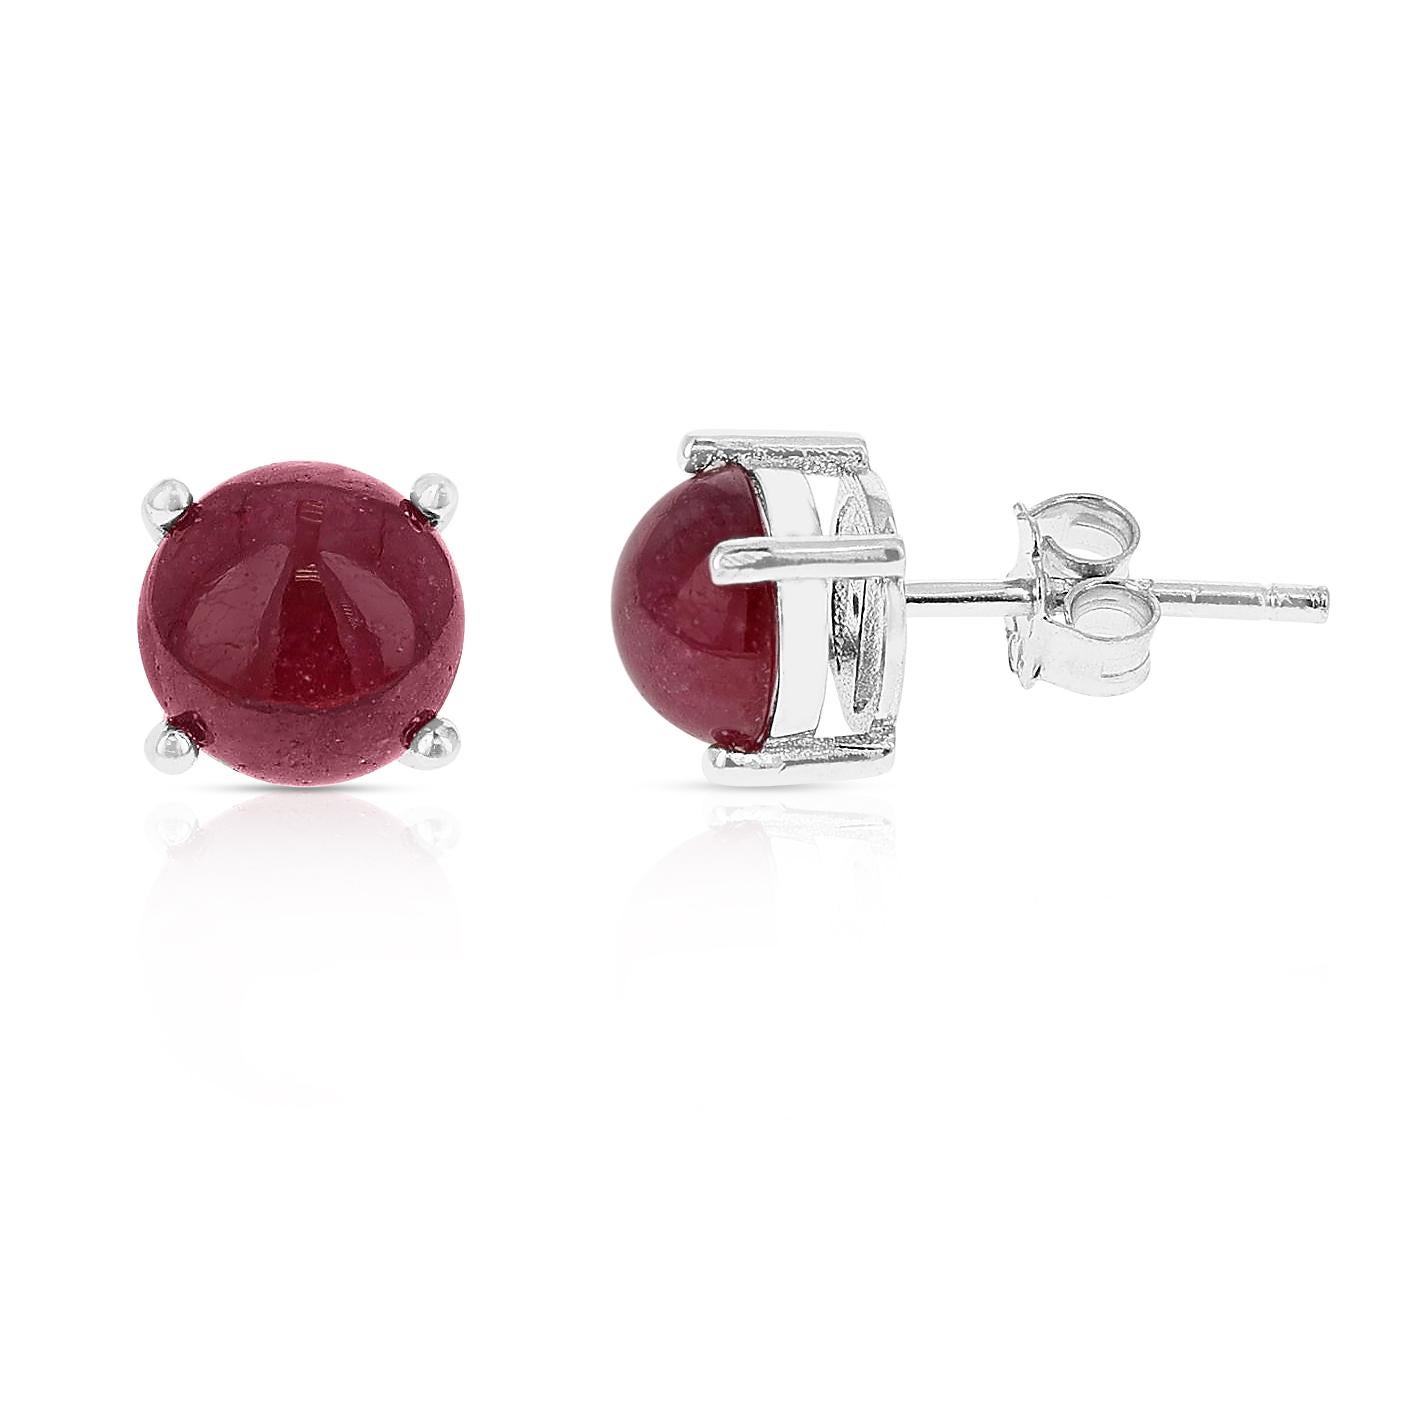 A pair of 7MM Genuine Ruby Round Cabochon Stud Earrings made in Sterling Silver. The total stone weight is approximately 4 carats.